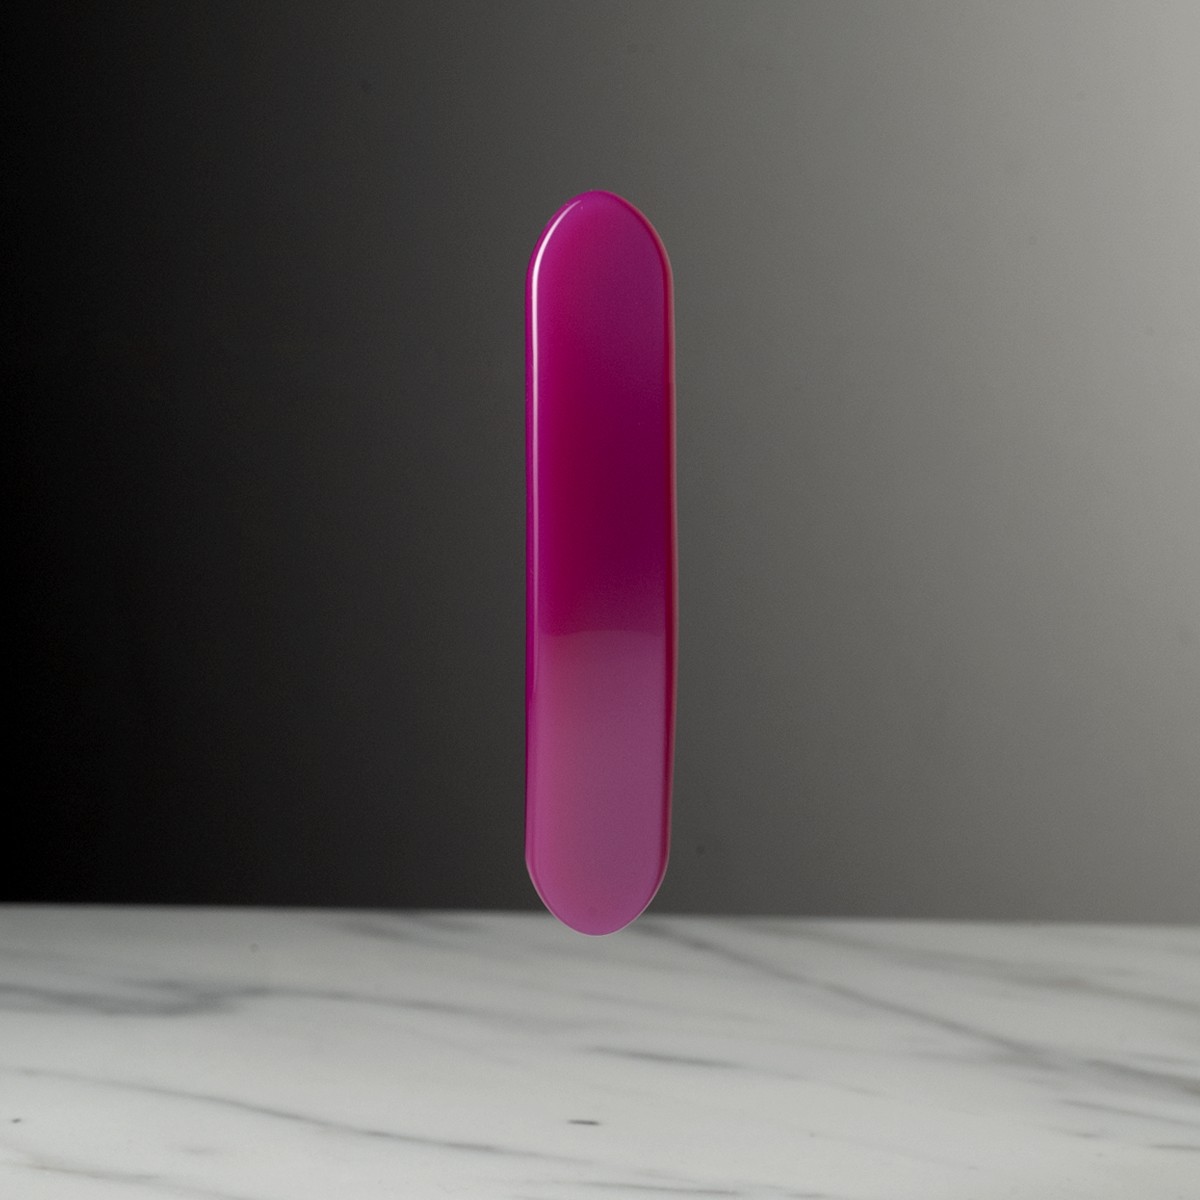 COUSSIN SIZE S 7CM - Barrette in acetate, handcrafted by the Hervé Domar workshop